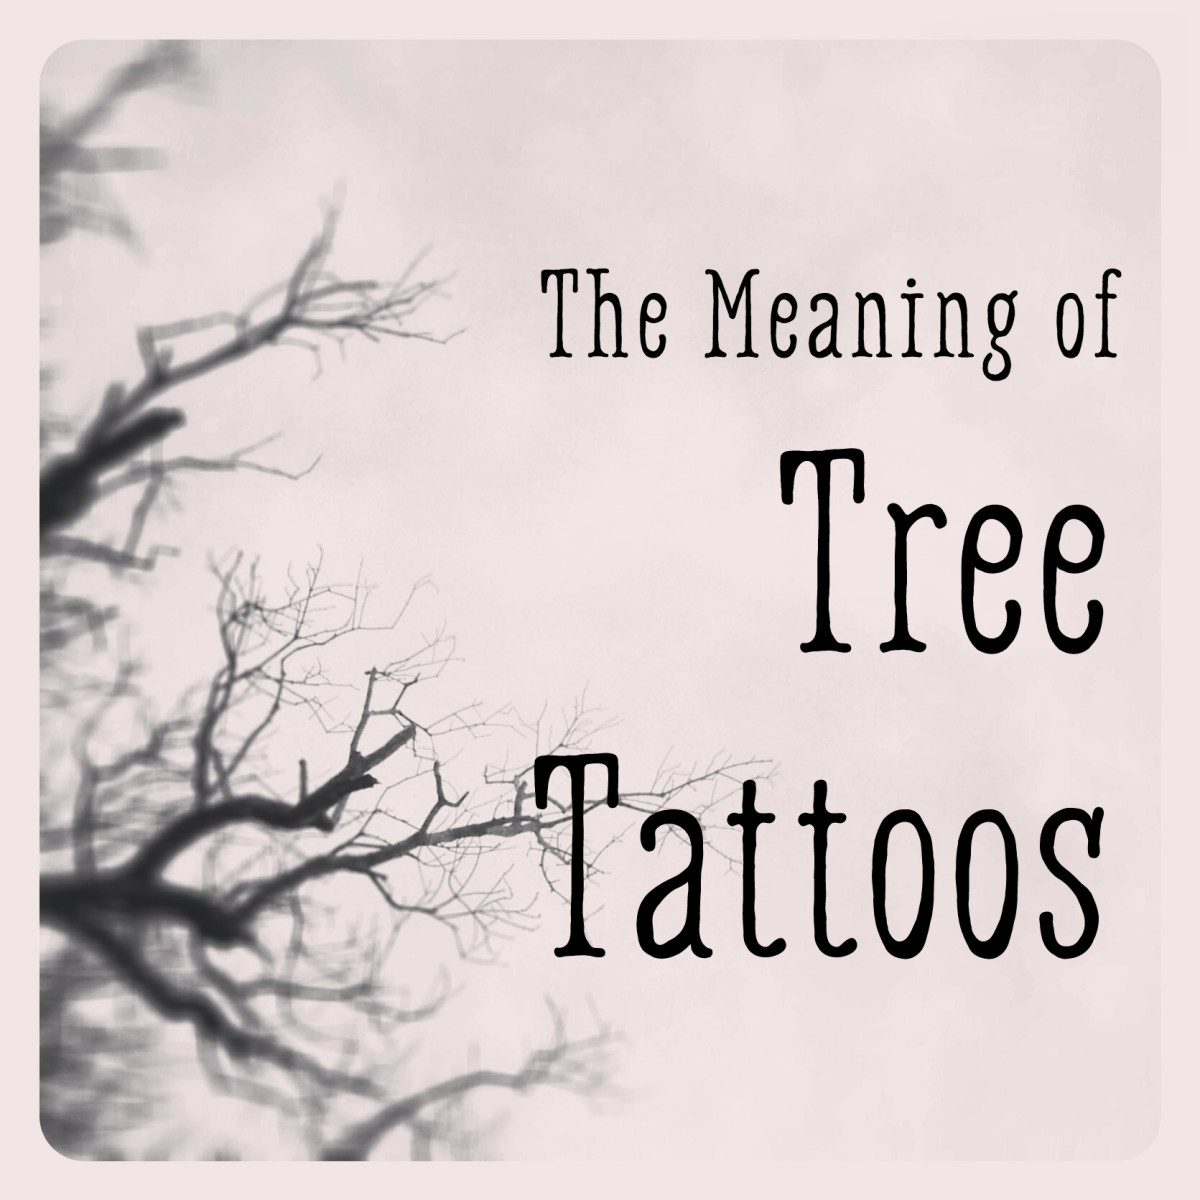 yew tree tattoo meaning